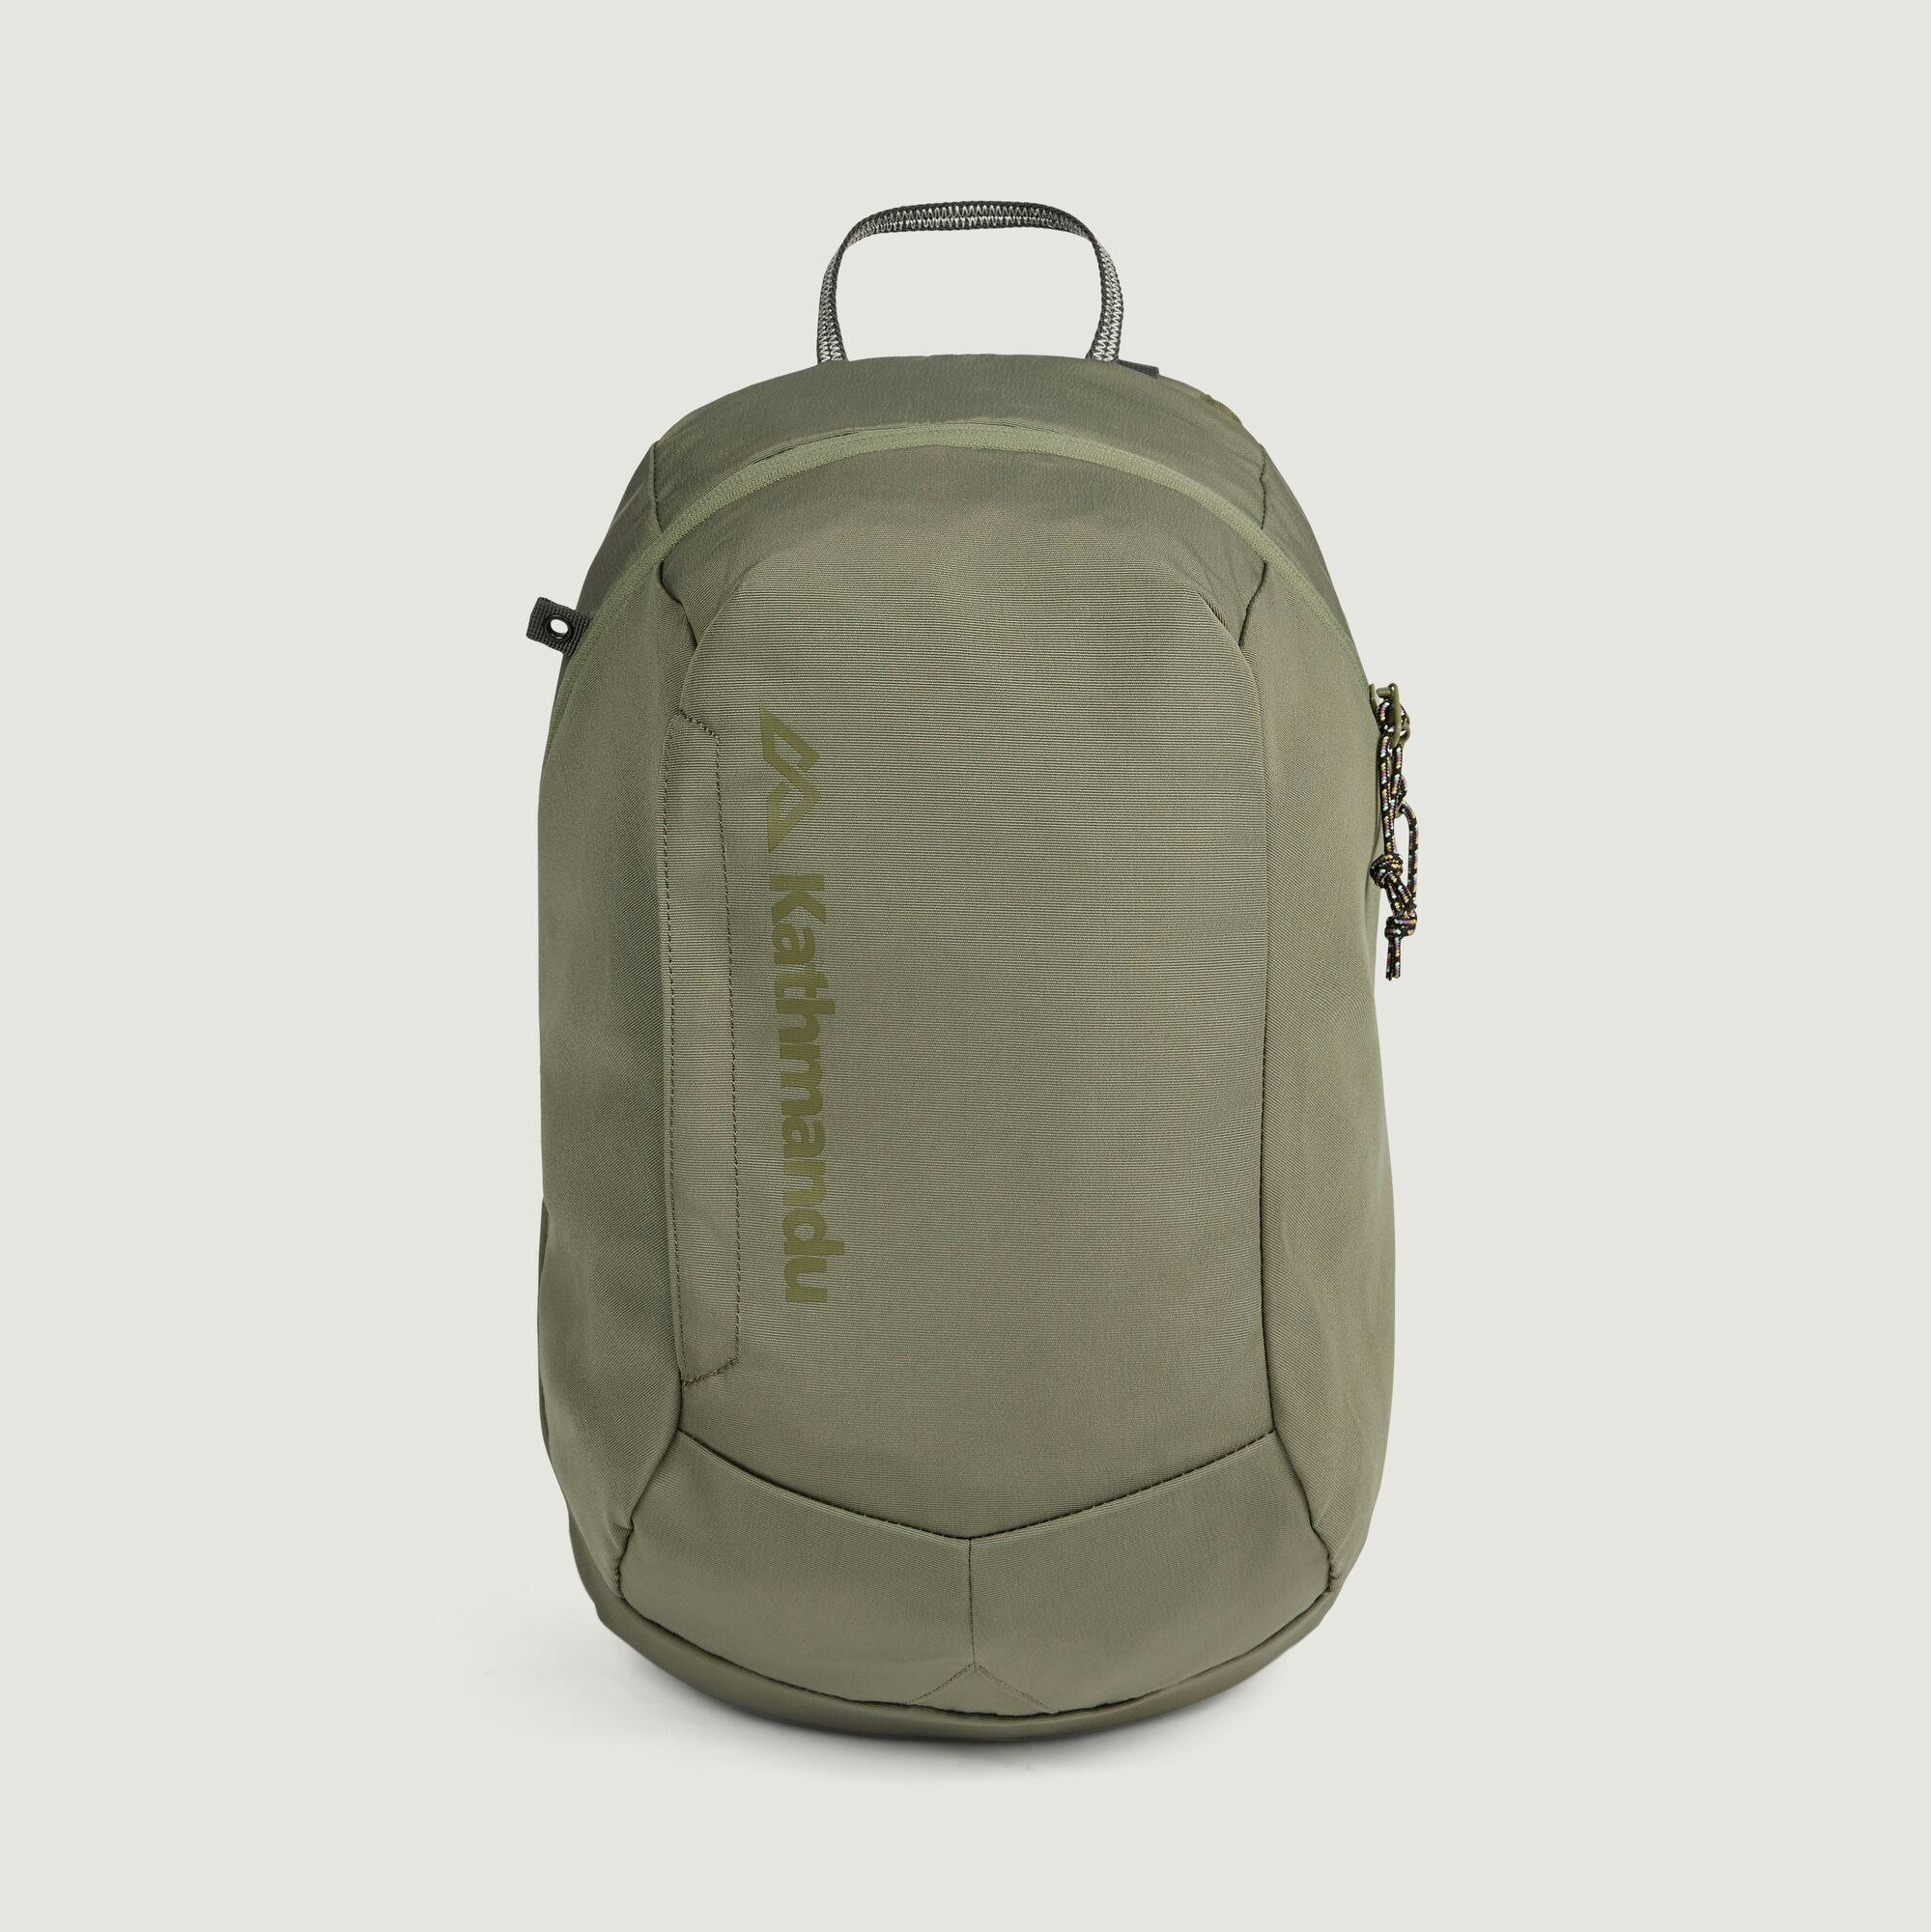 Carry on Bag, 50L Travel Bag Flight Approved Backpack with 3 Green | eBay